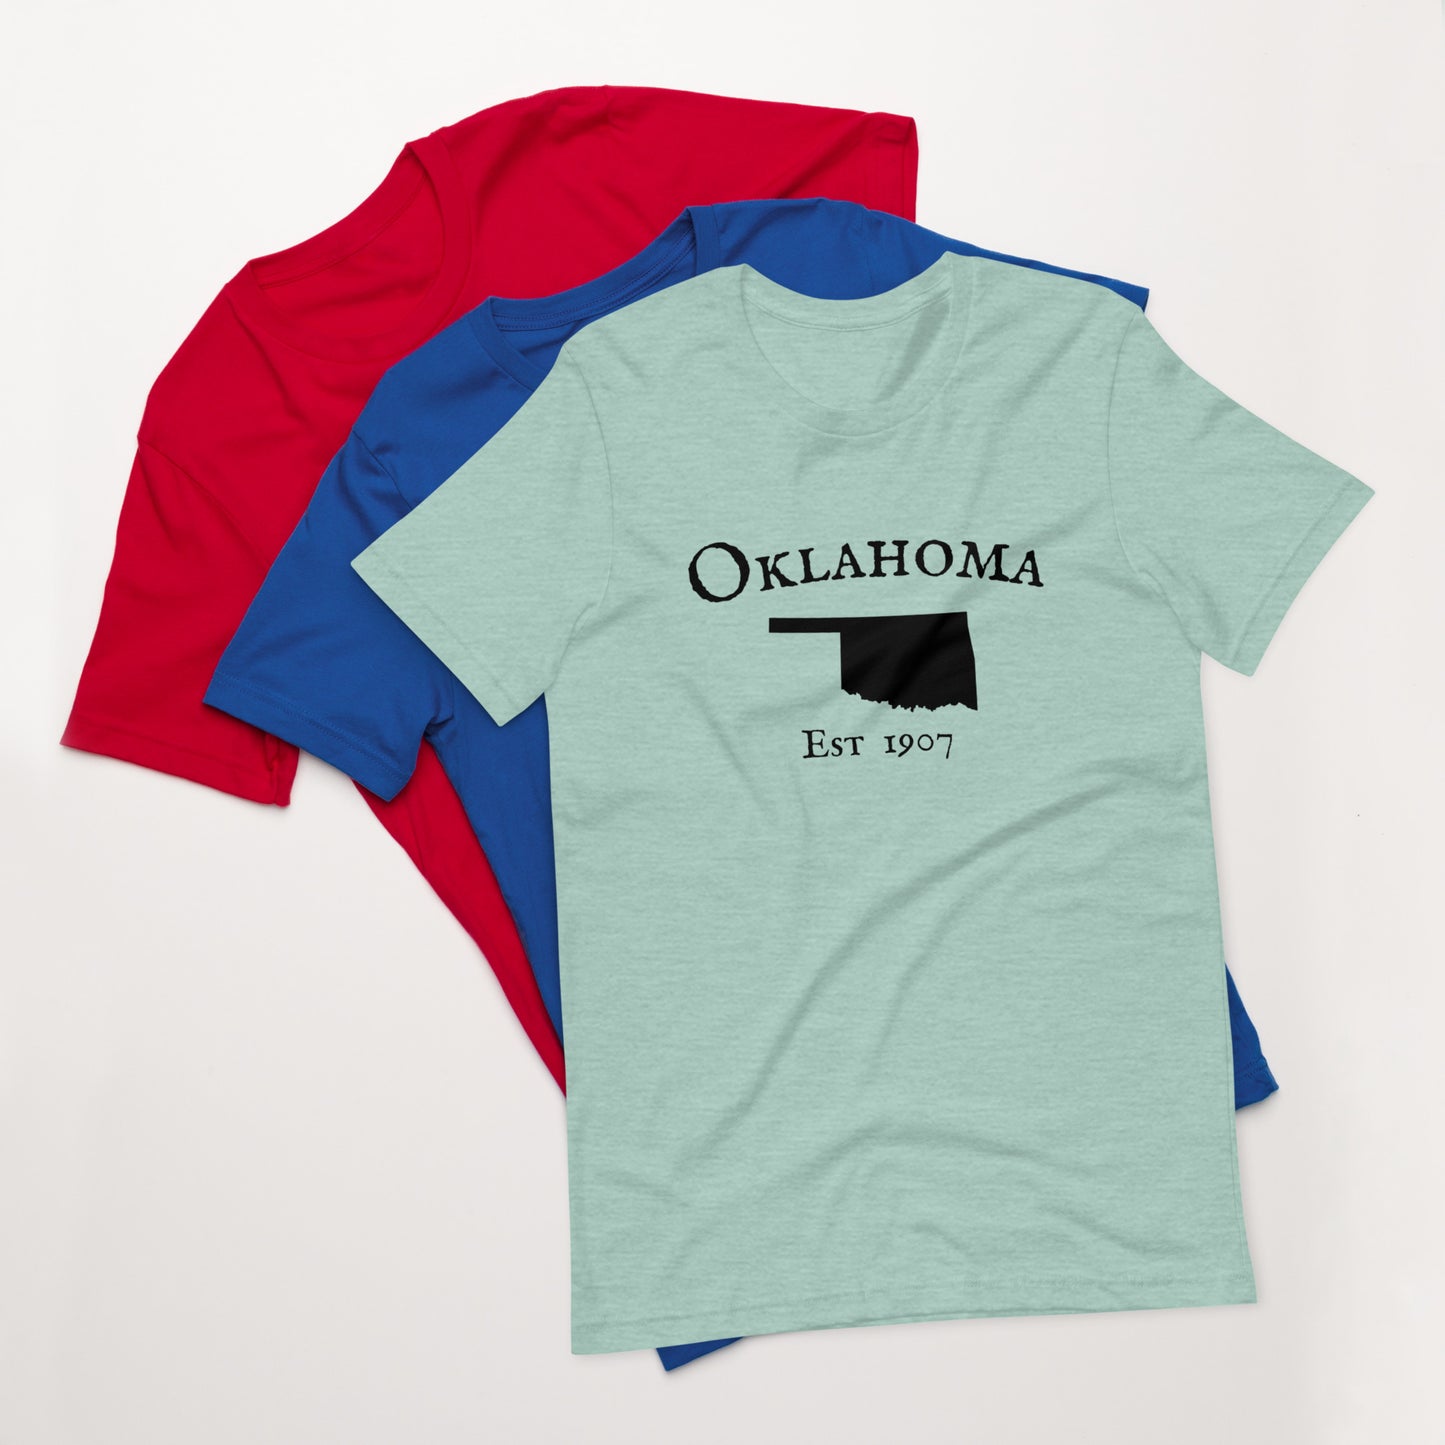 "Oklahoma Established In 1907" T-Shirt - Weave Got Gifts - Unique Gifts You Won’t Find Anywhere Else!